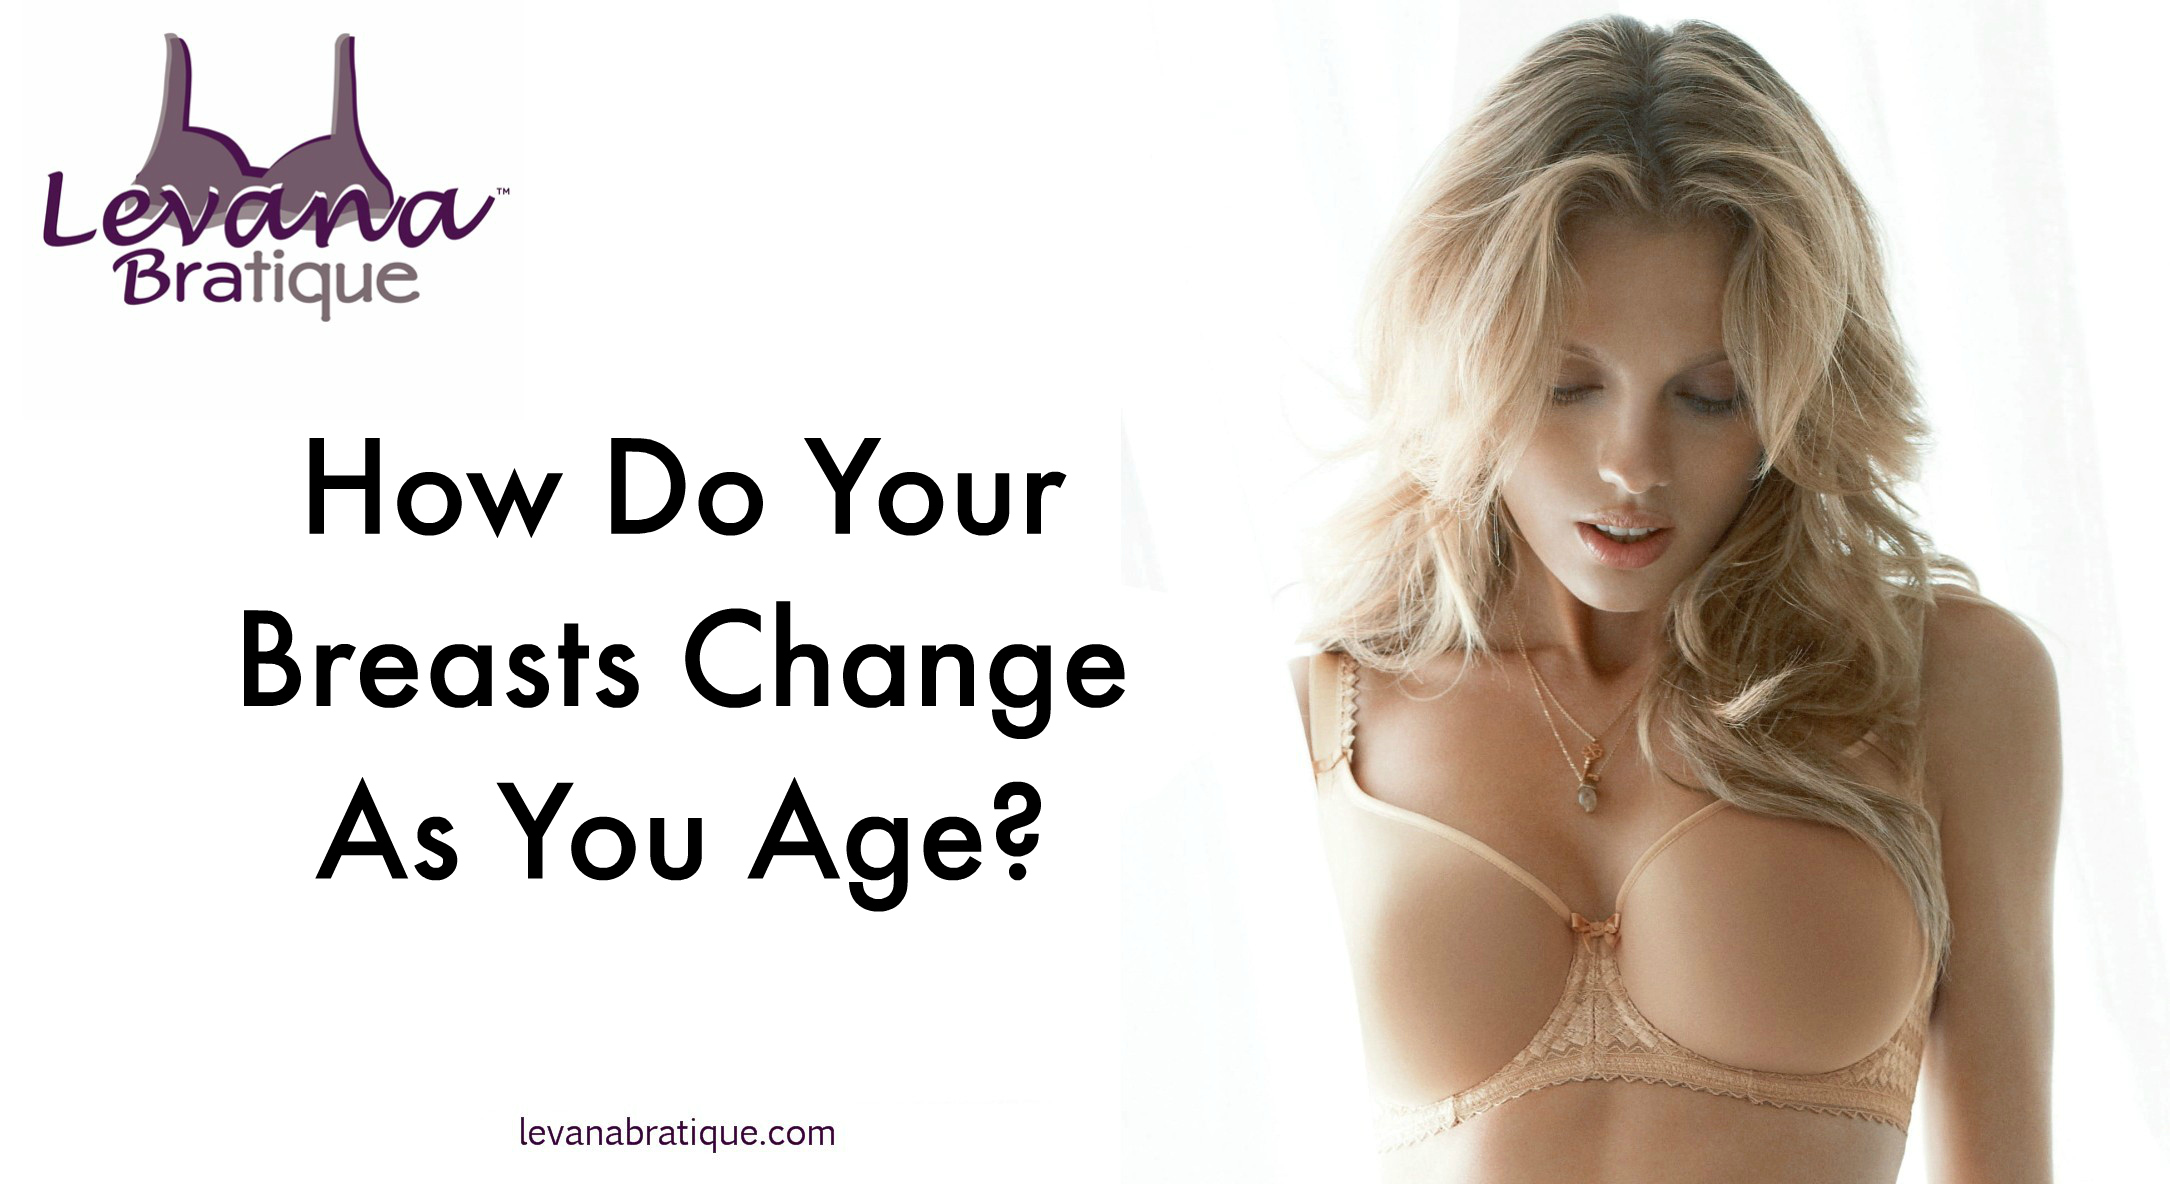 Which Bra is Best to Reduce Breast Size? – The Perky Lady